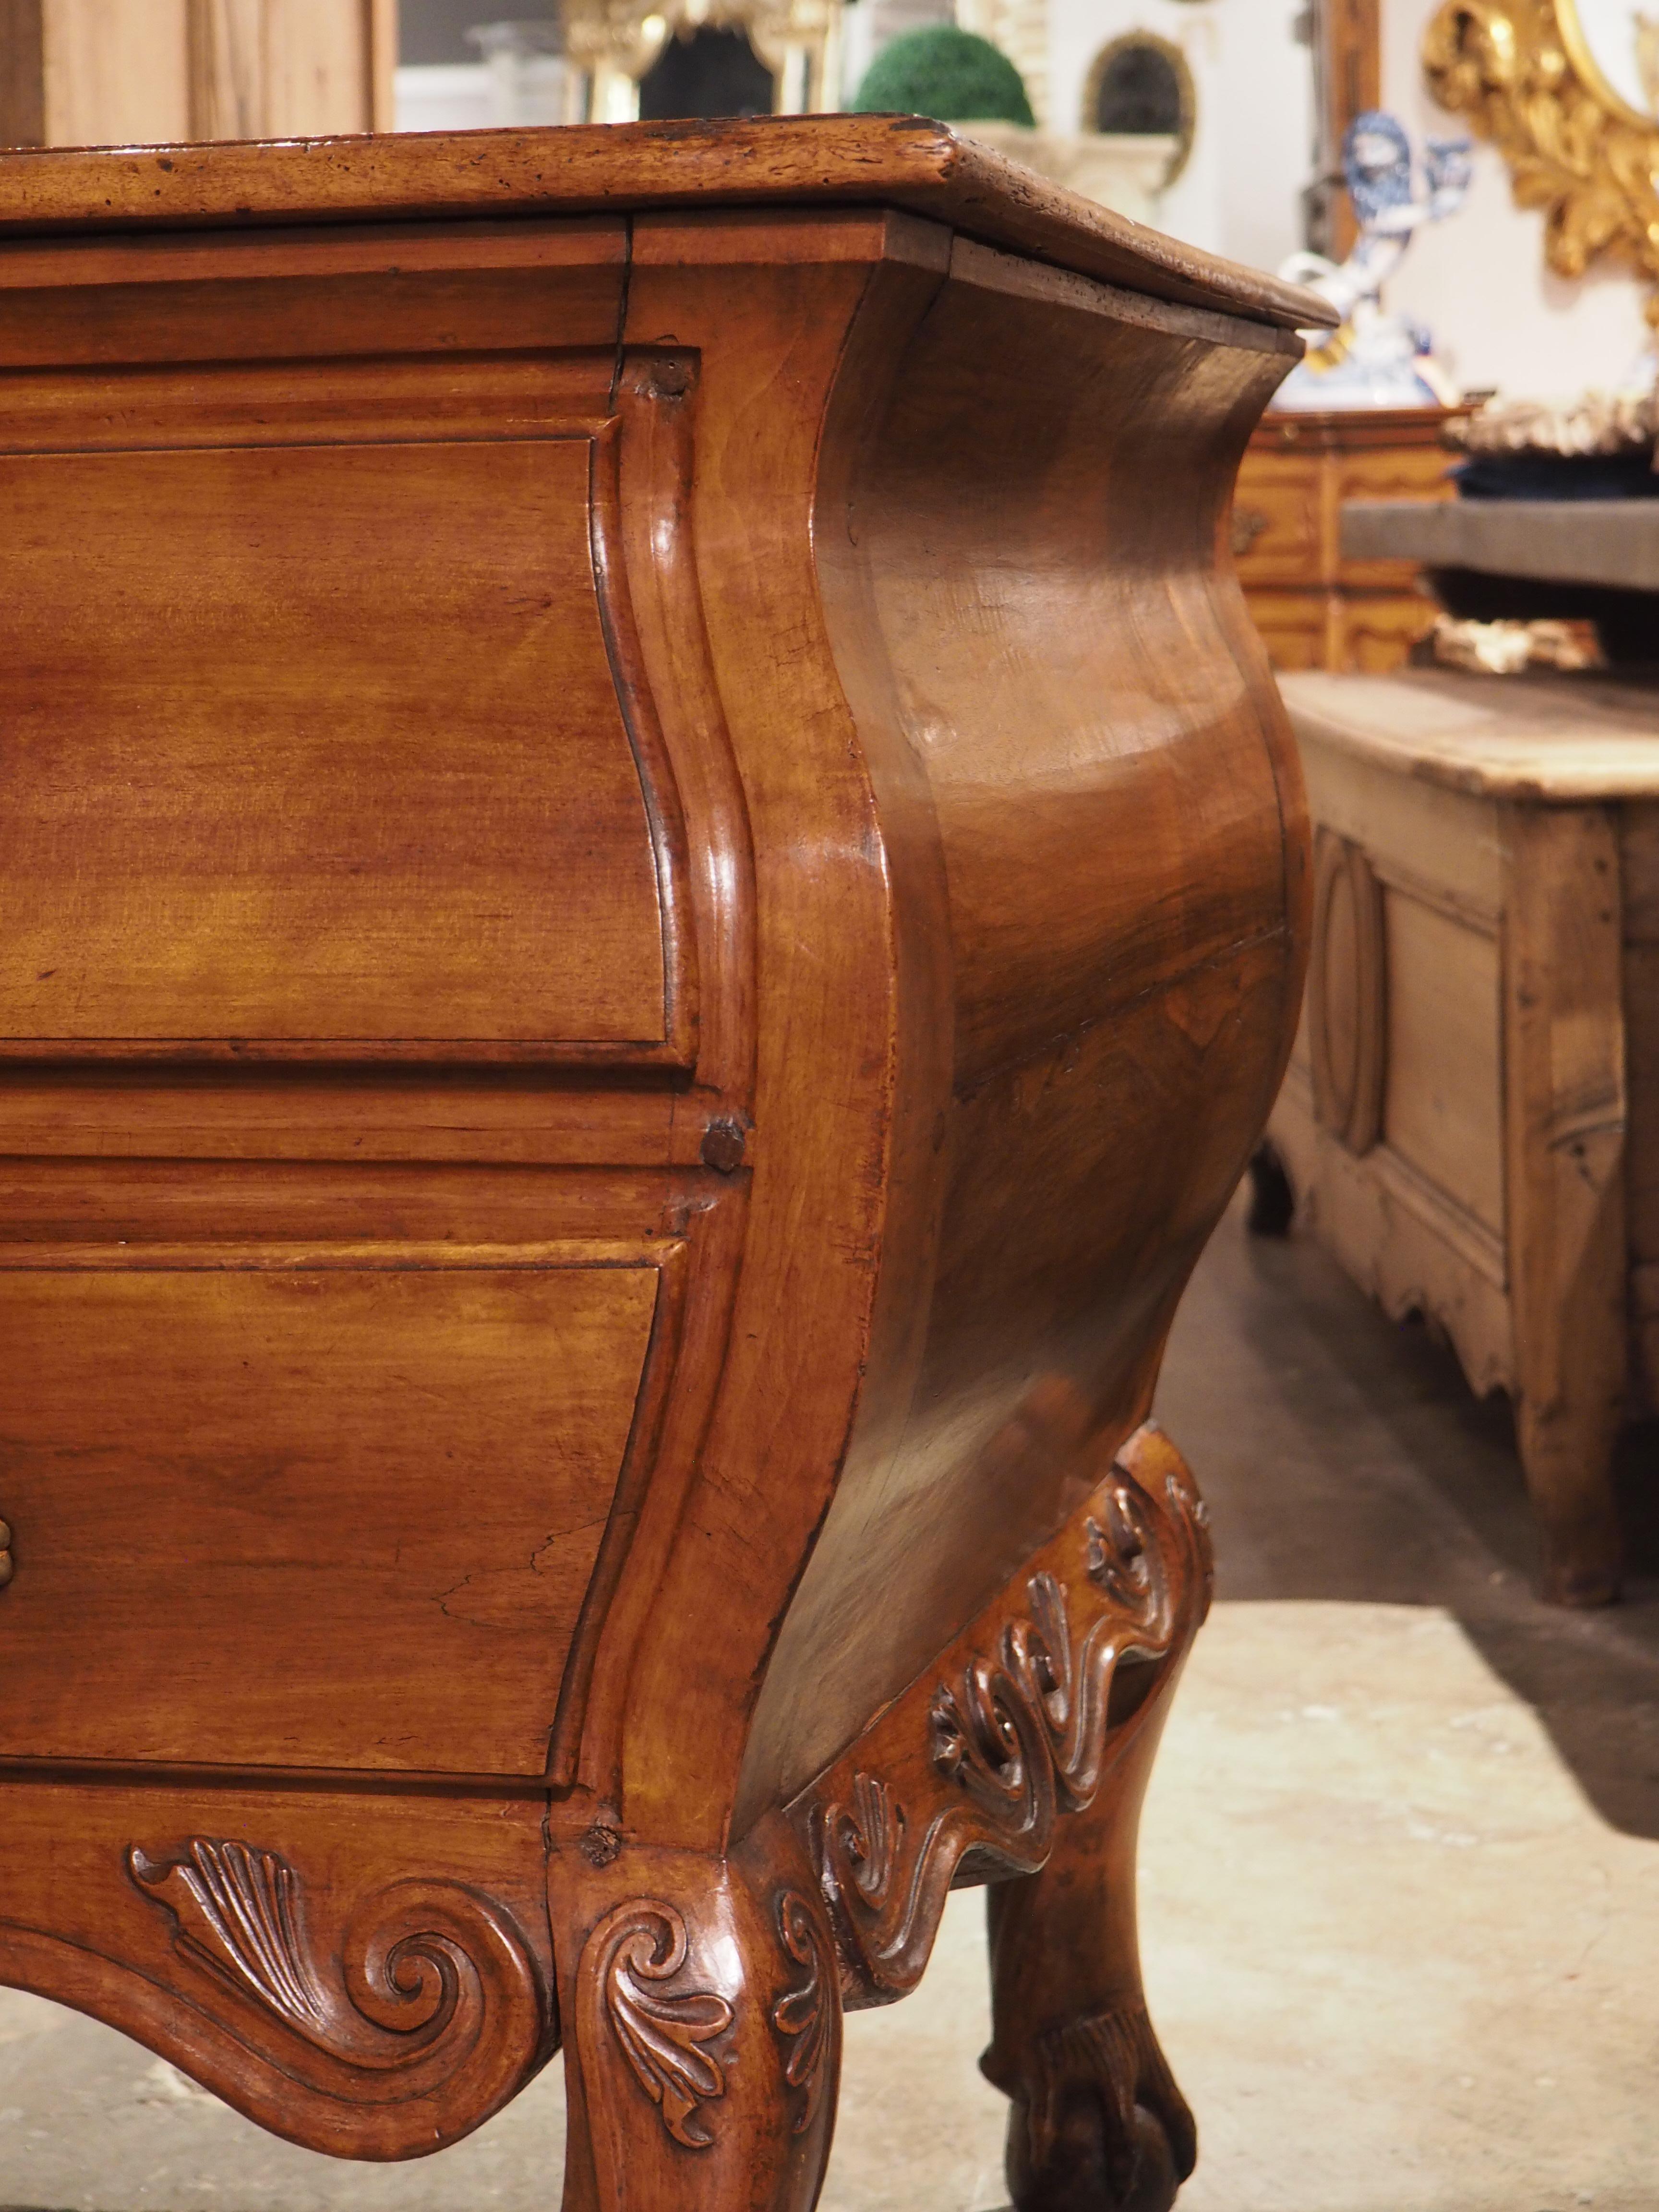 Rare 18th Century French Walnut Commode “Angouleme” with Stamped Bronze Hardware For Sale 10